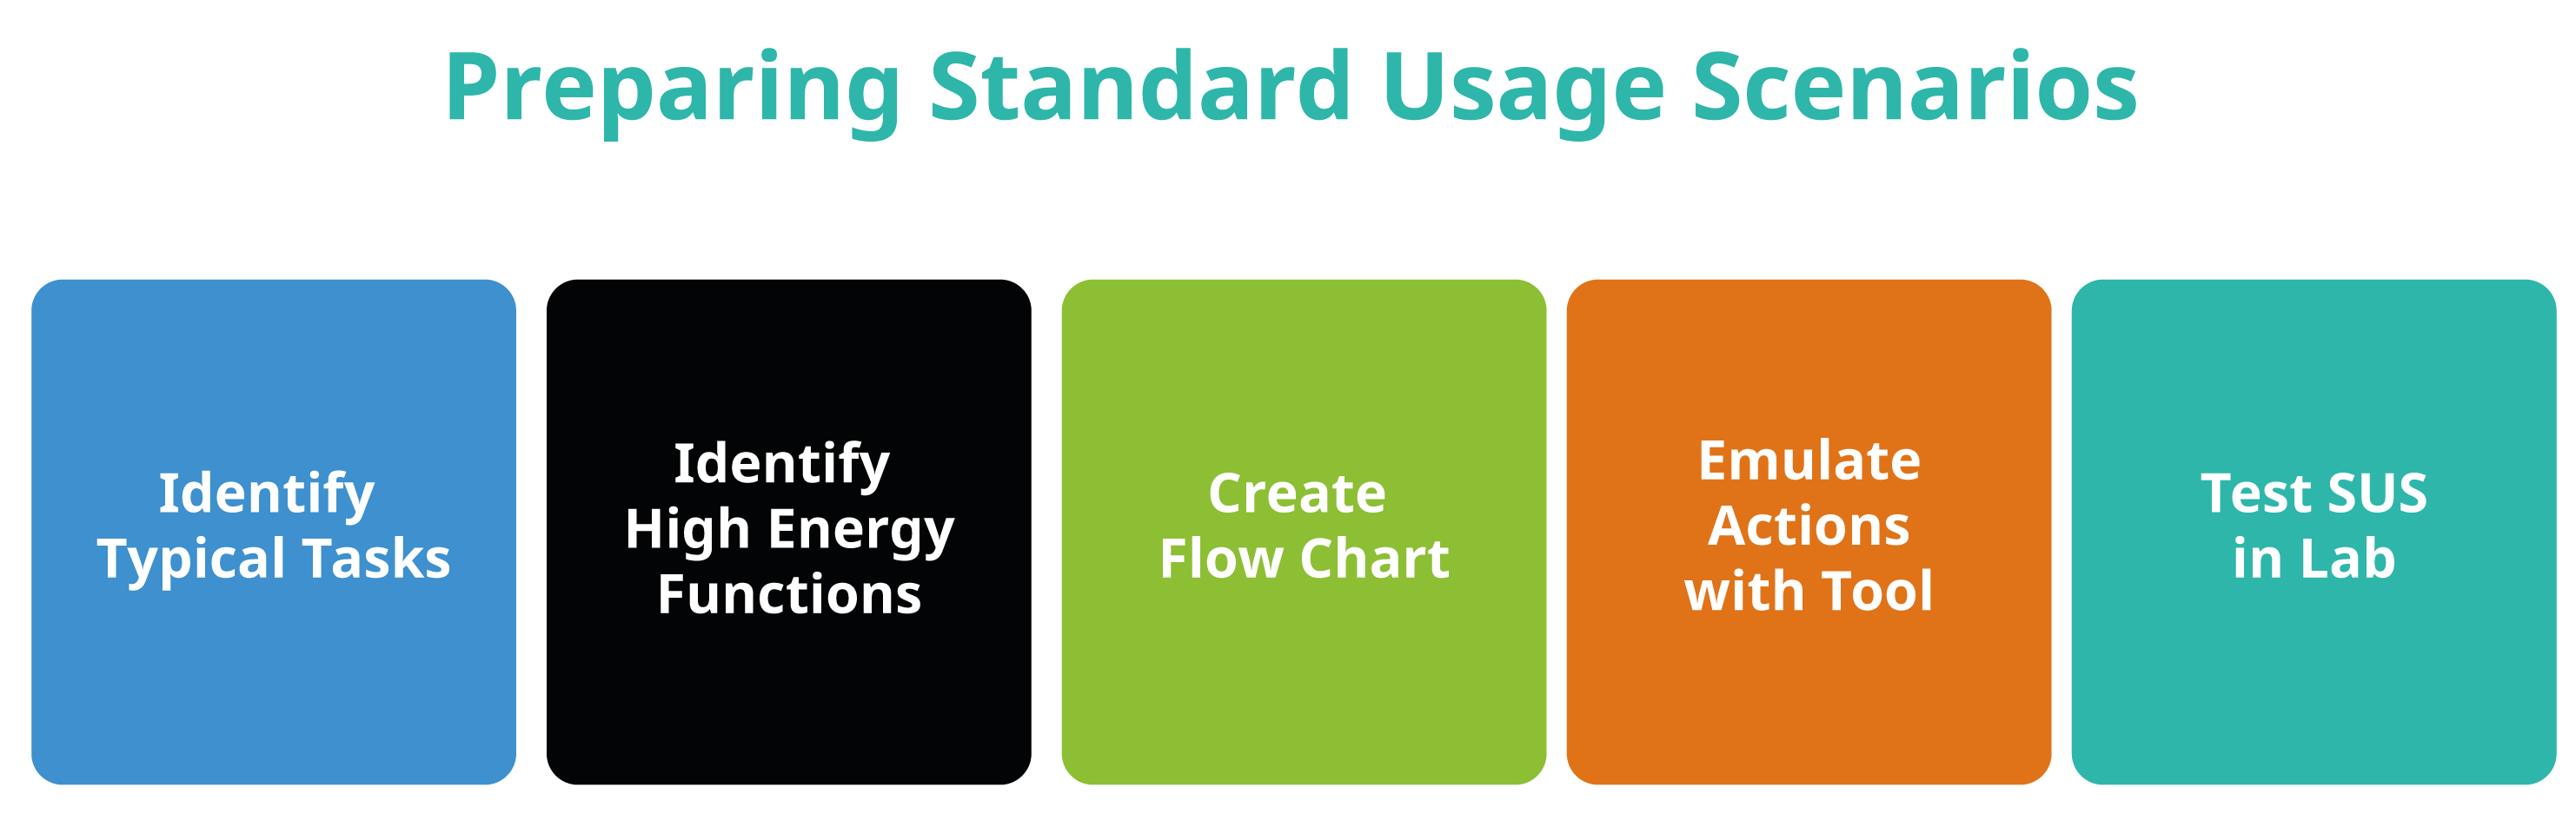 Steps for preparing Standard Usage Scenario (SUS) scripts to measure the energy consumption of software. (Image from KDE published under a <a href="https://spdx.org/licenses/CC-BY-SA-4.0.html">CC-BY-SA-4.0</a> license. Design by Lana Lutz.)